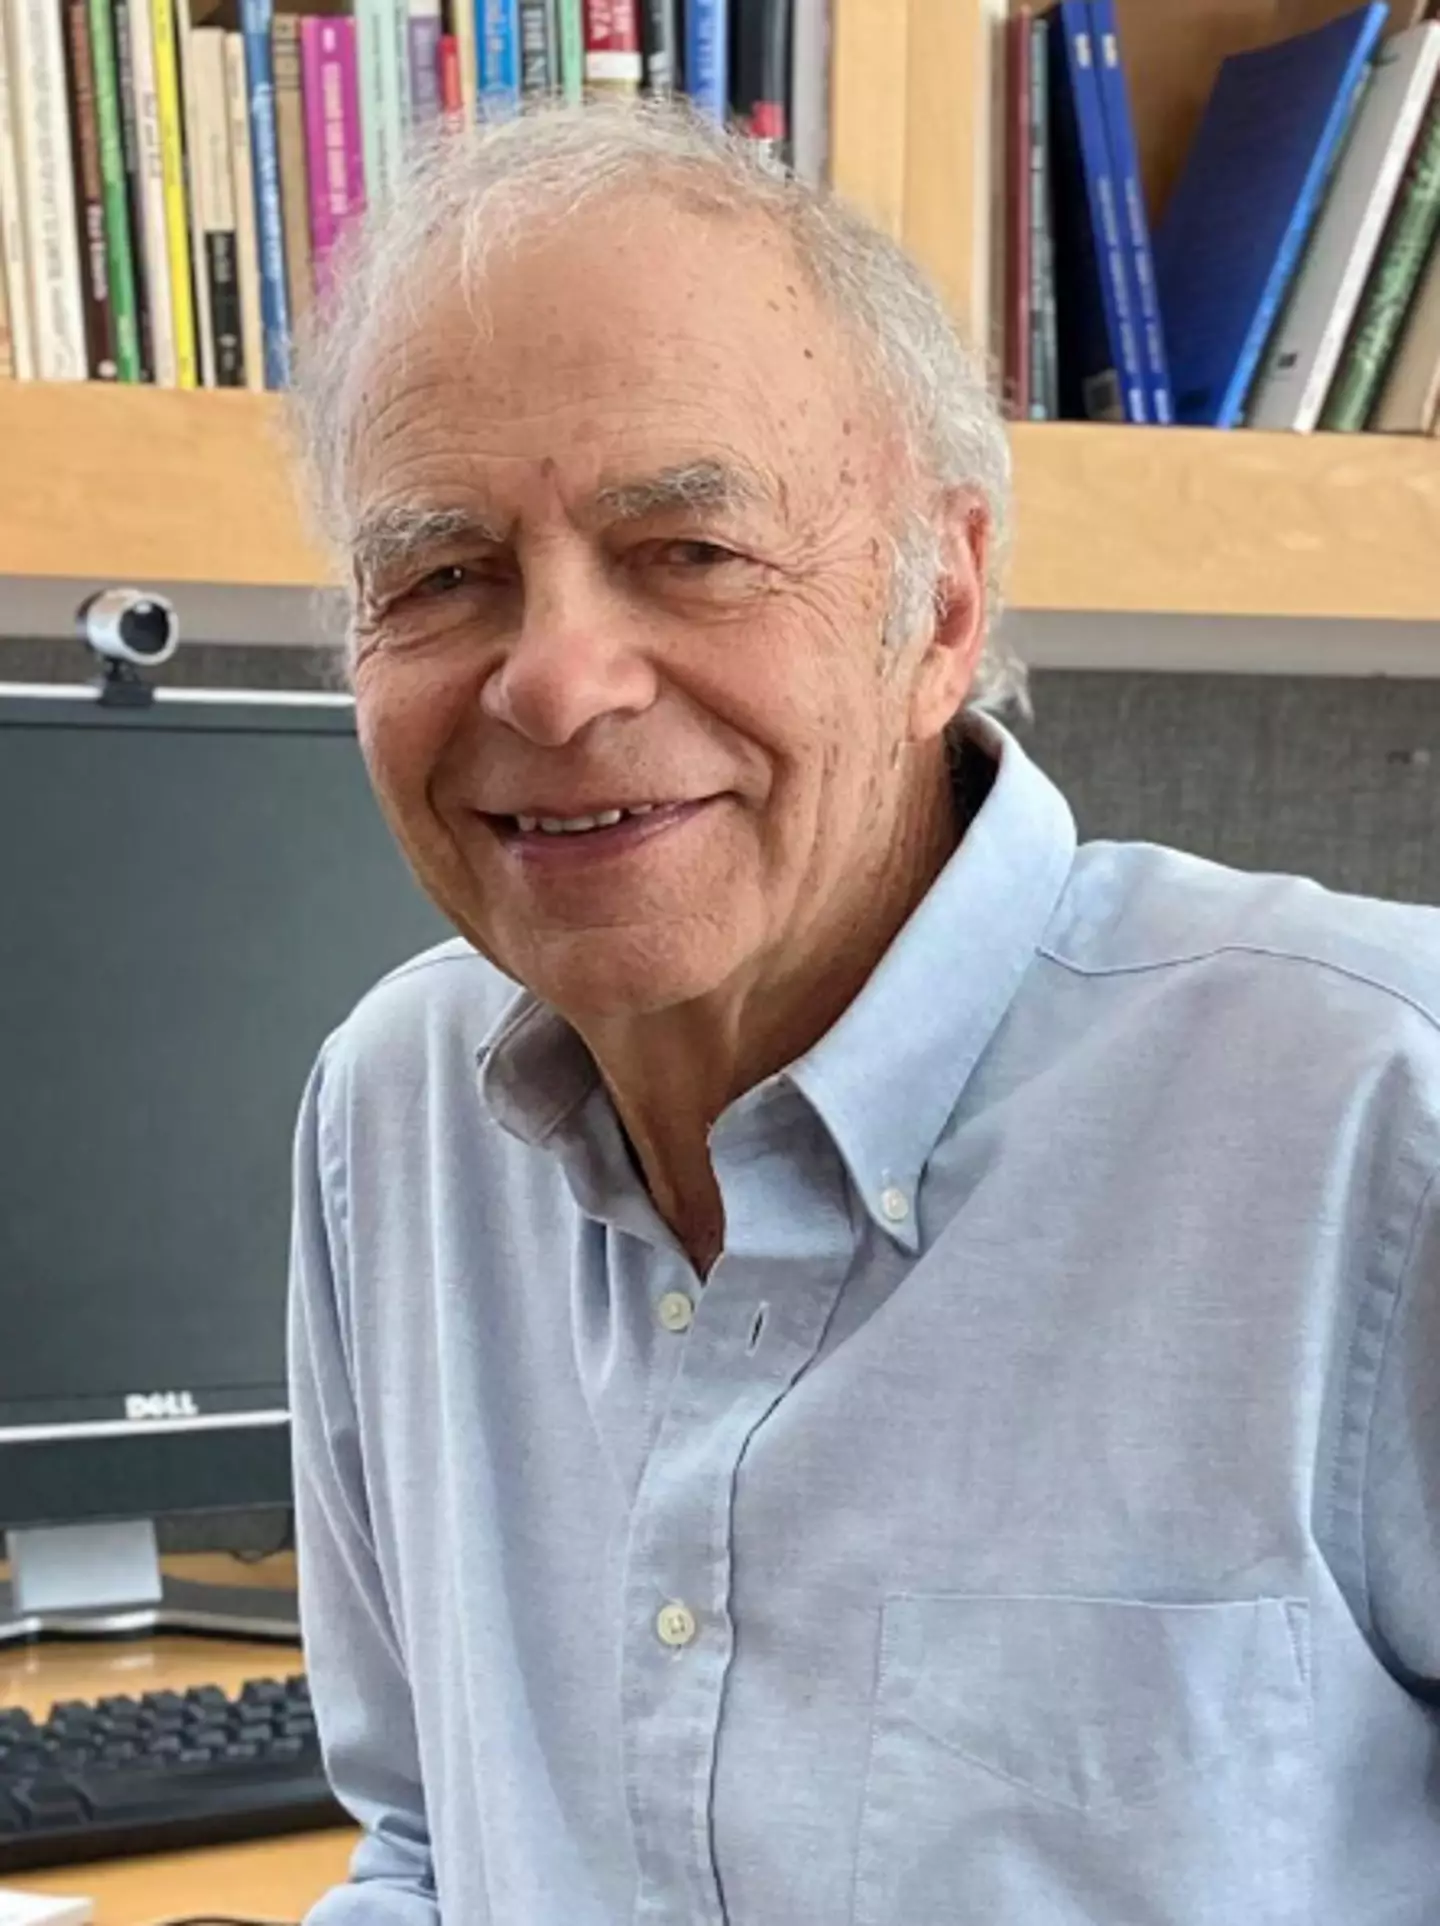 Professor Peter Singer has come under fire for making a reading recommendation.